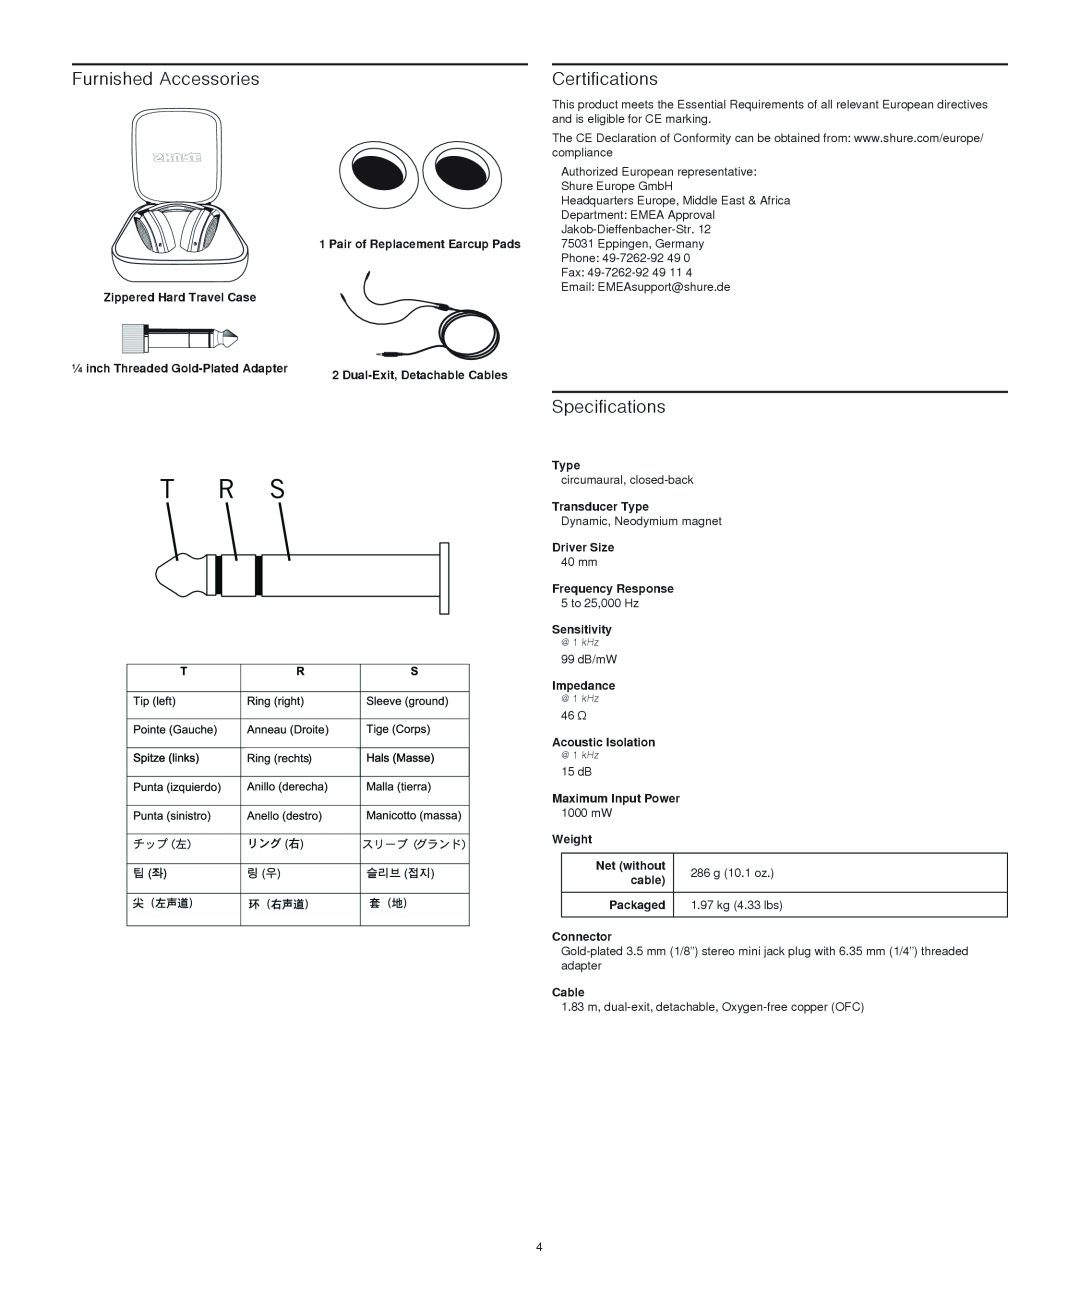 Shure SRH1540 manual Furnished Accessories, Certifications, Specifications 